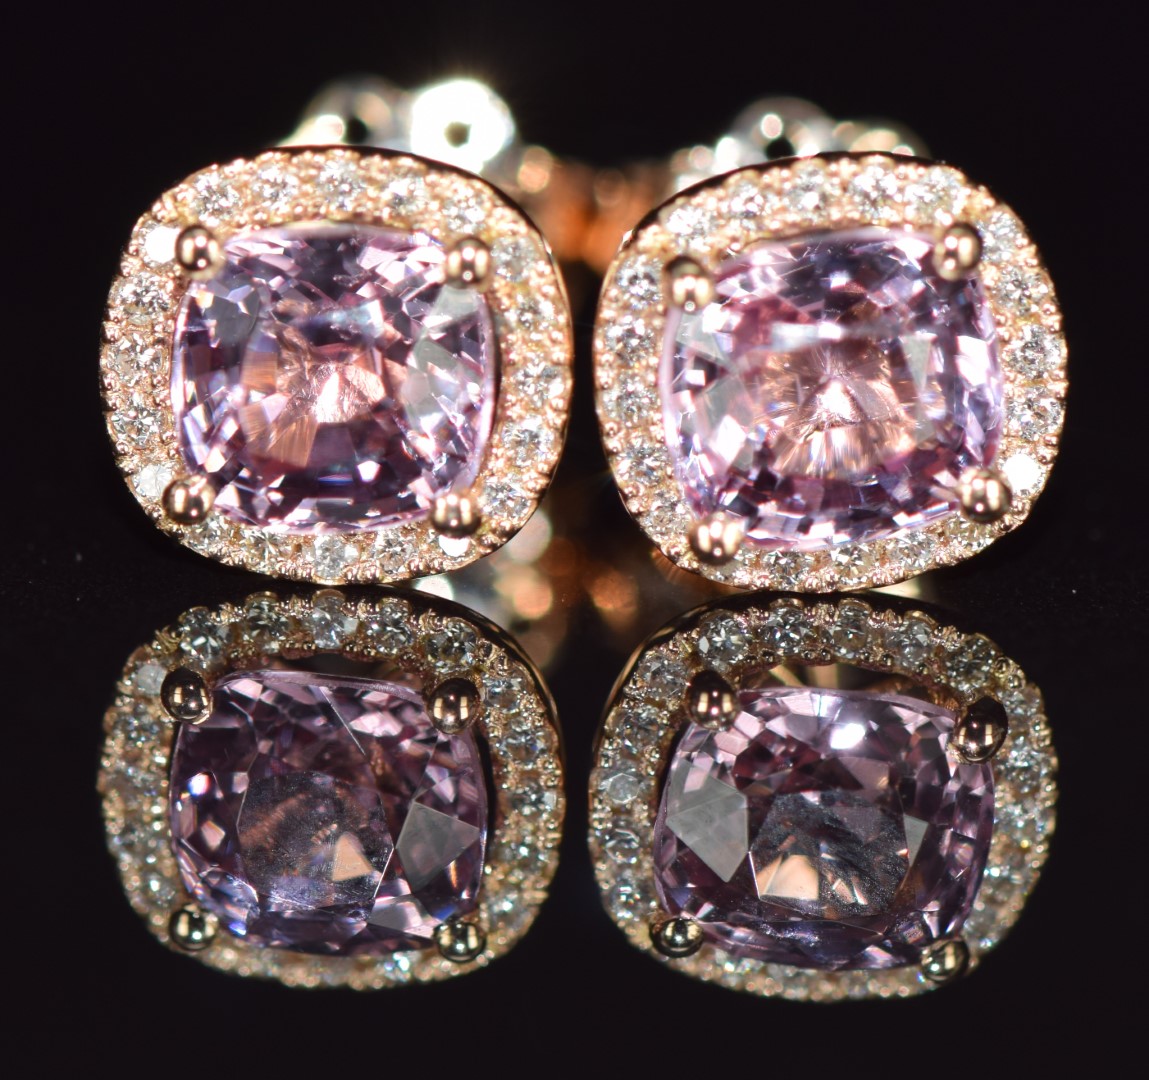 A pair of 18ct rose gold earrings each set with a 1.2ct pink sapphire surrounded by diamonds, 2.5g